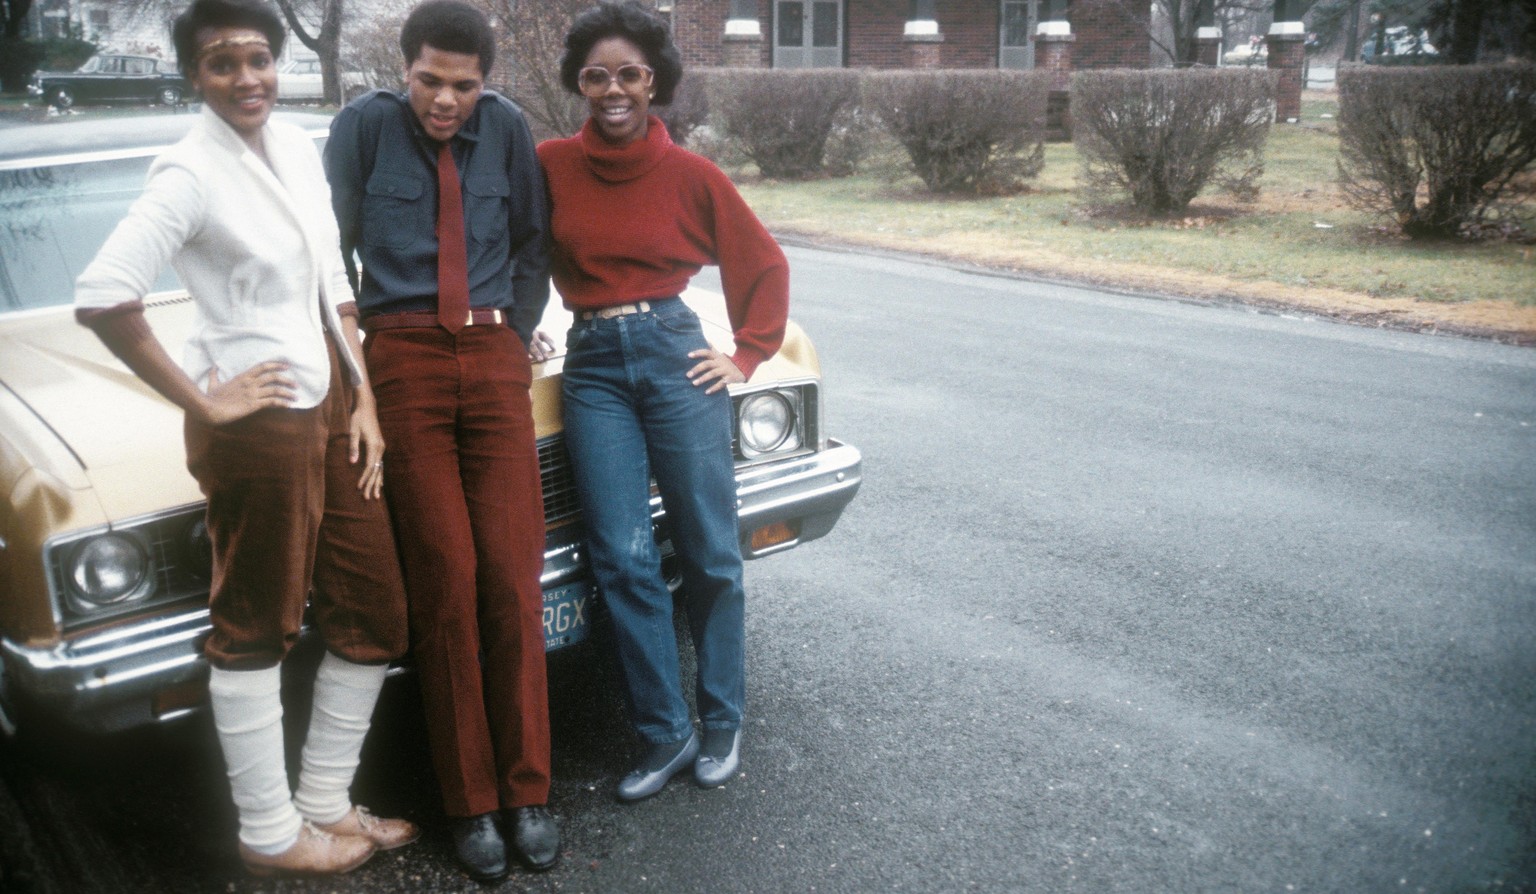 Students at Neptune High School, New Jersey, USA 1981. (Photo by: PYMCA/Universal Images Group via Getty Images)